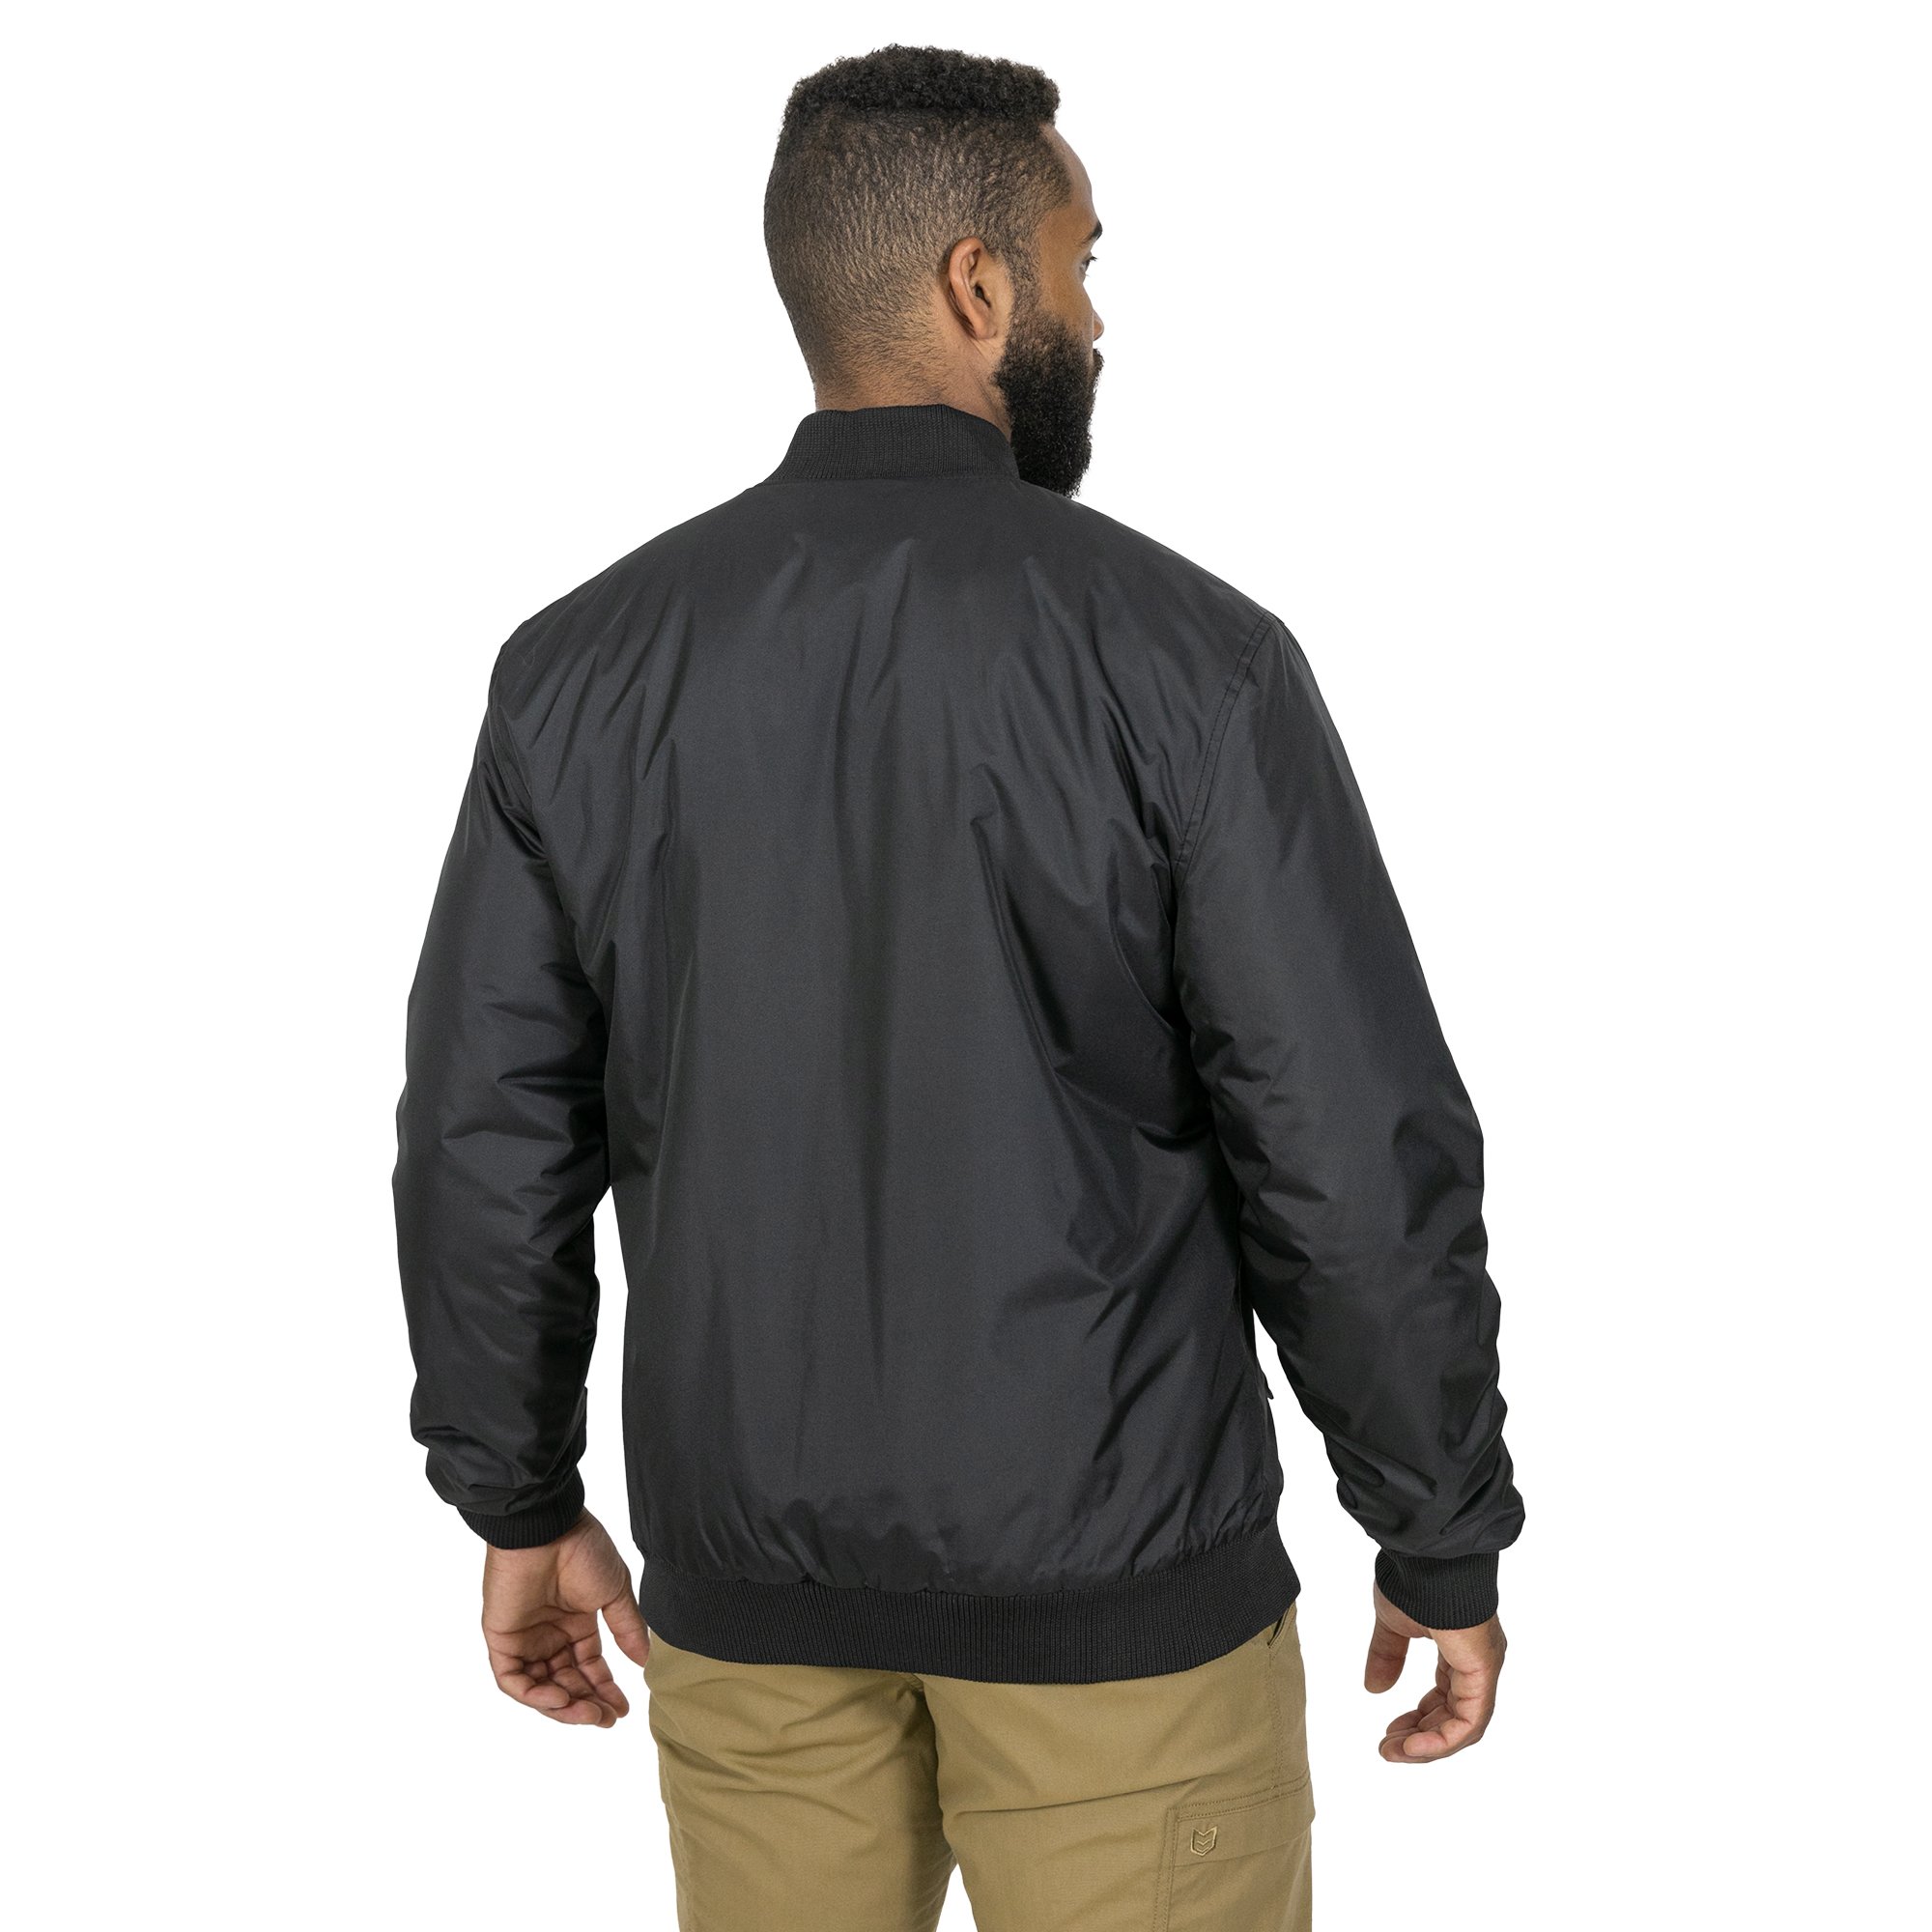 Men's Mission Made Bomber Jacket | Tactical Gear Superstore ...